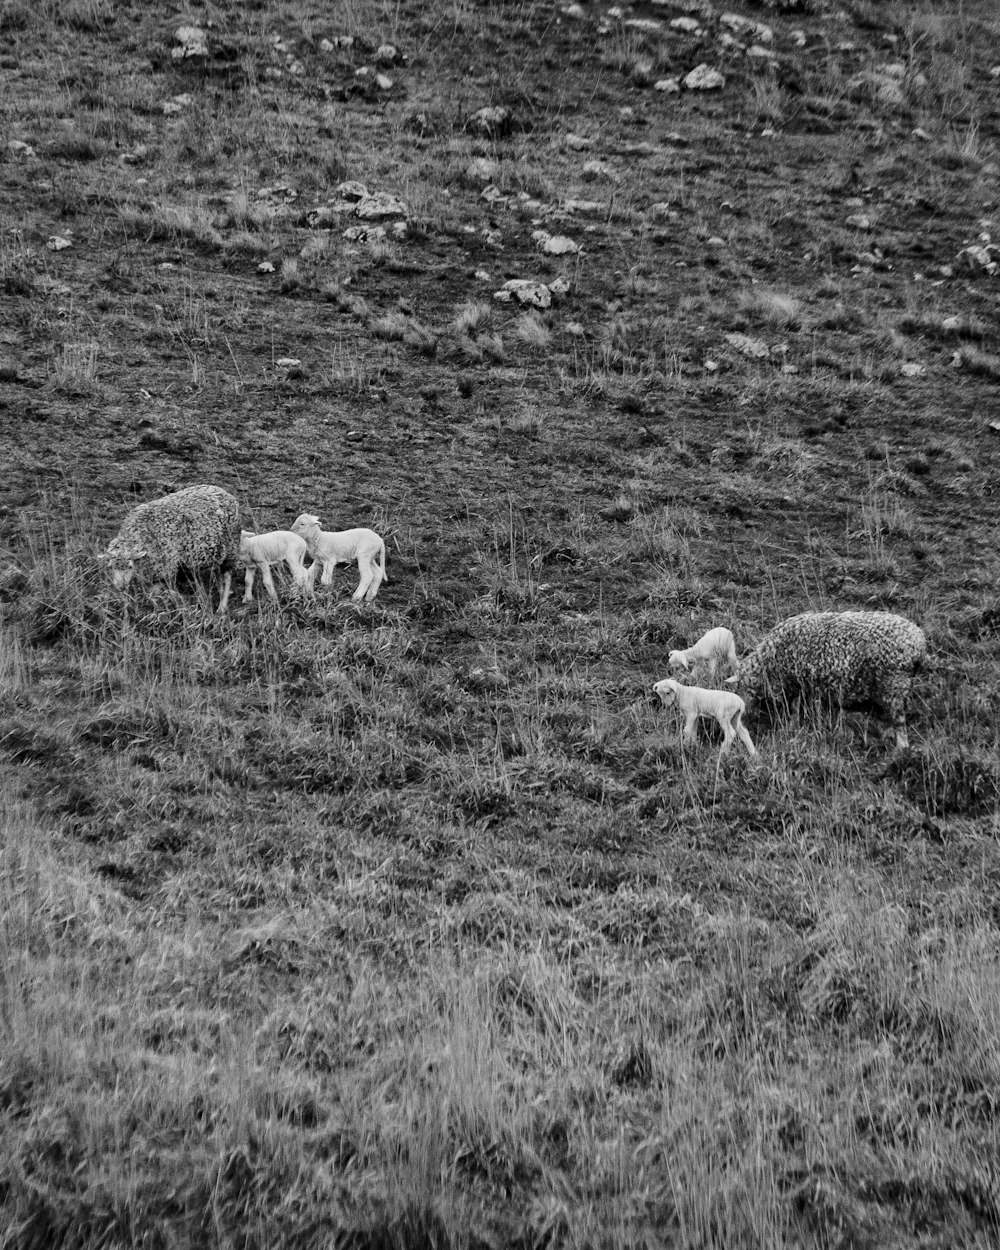 sheep on grass field in grayscale photography